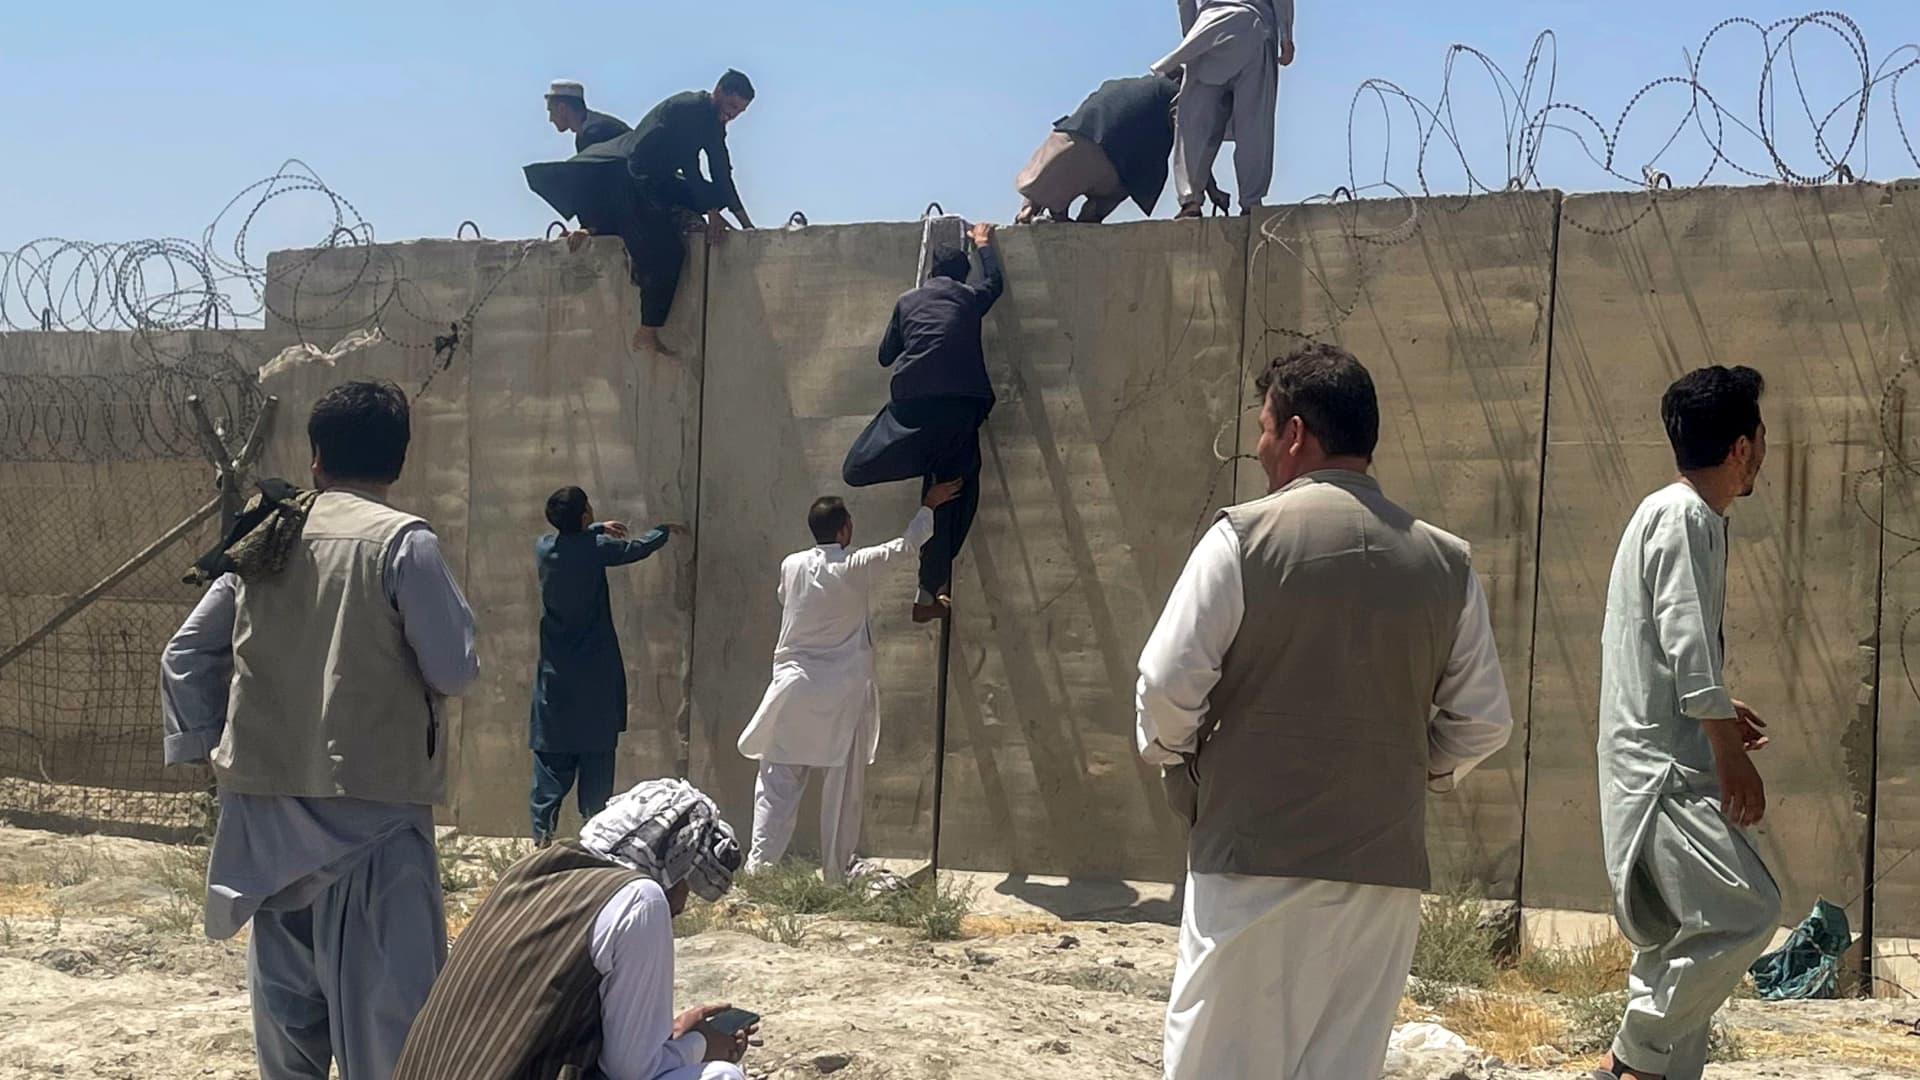 Men try to get inside Hamid Karzai International Airport in Kabul, Afghanistan August 16, 2021.